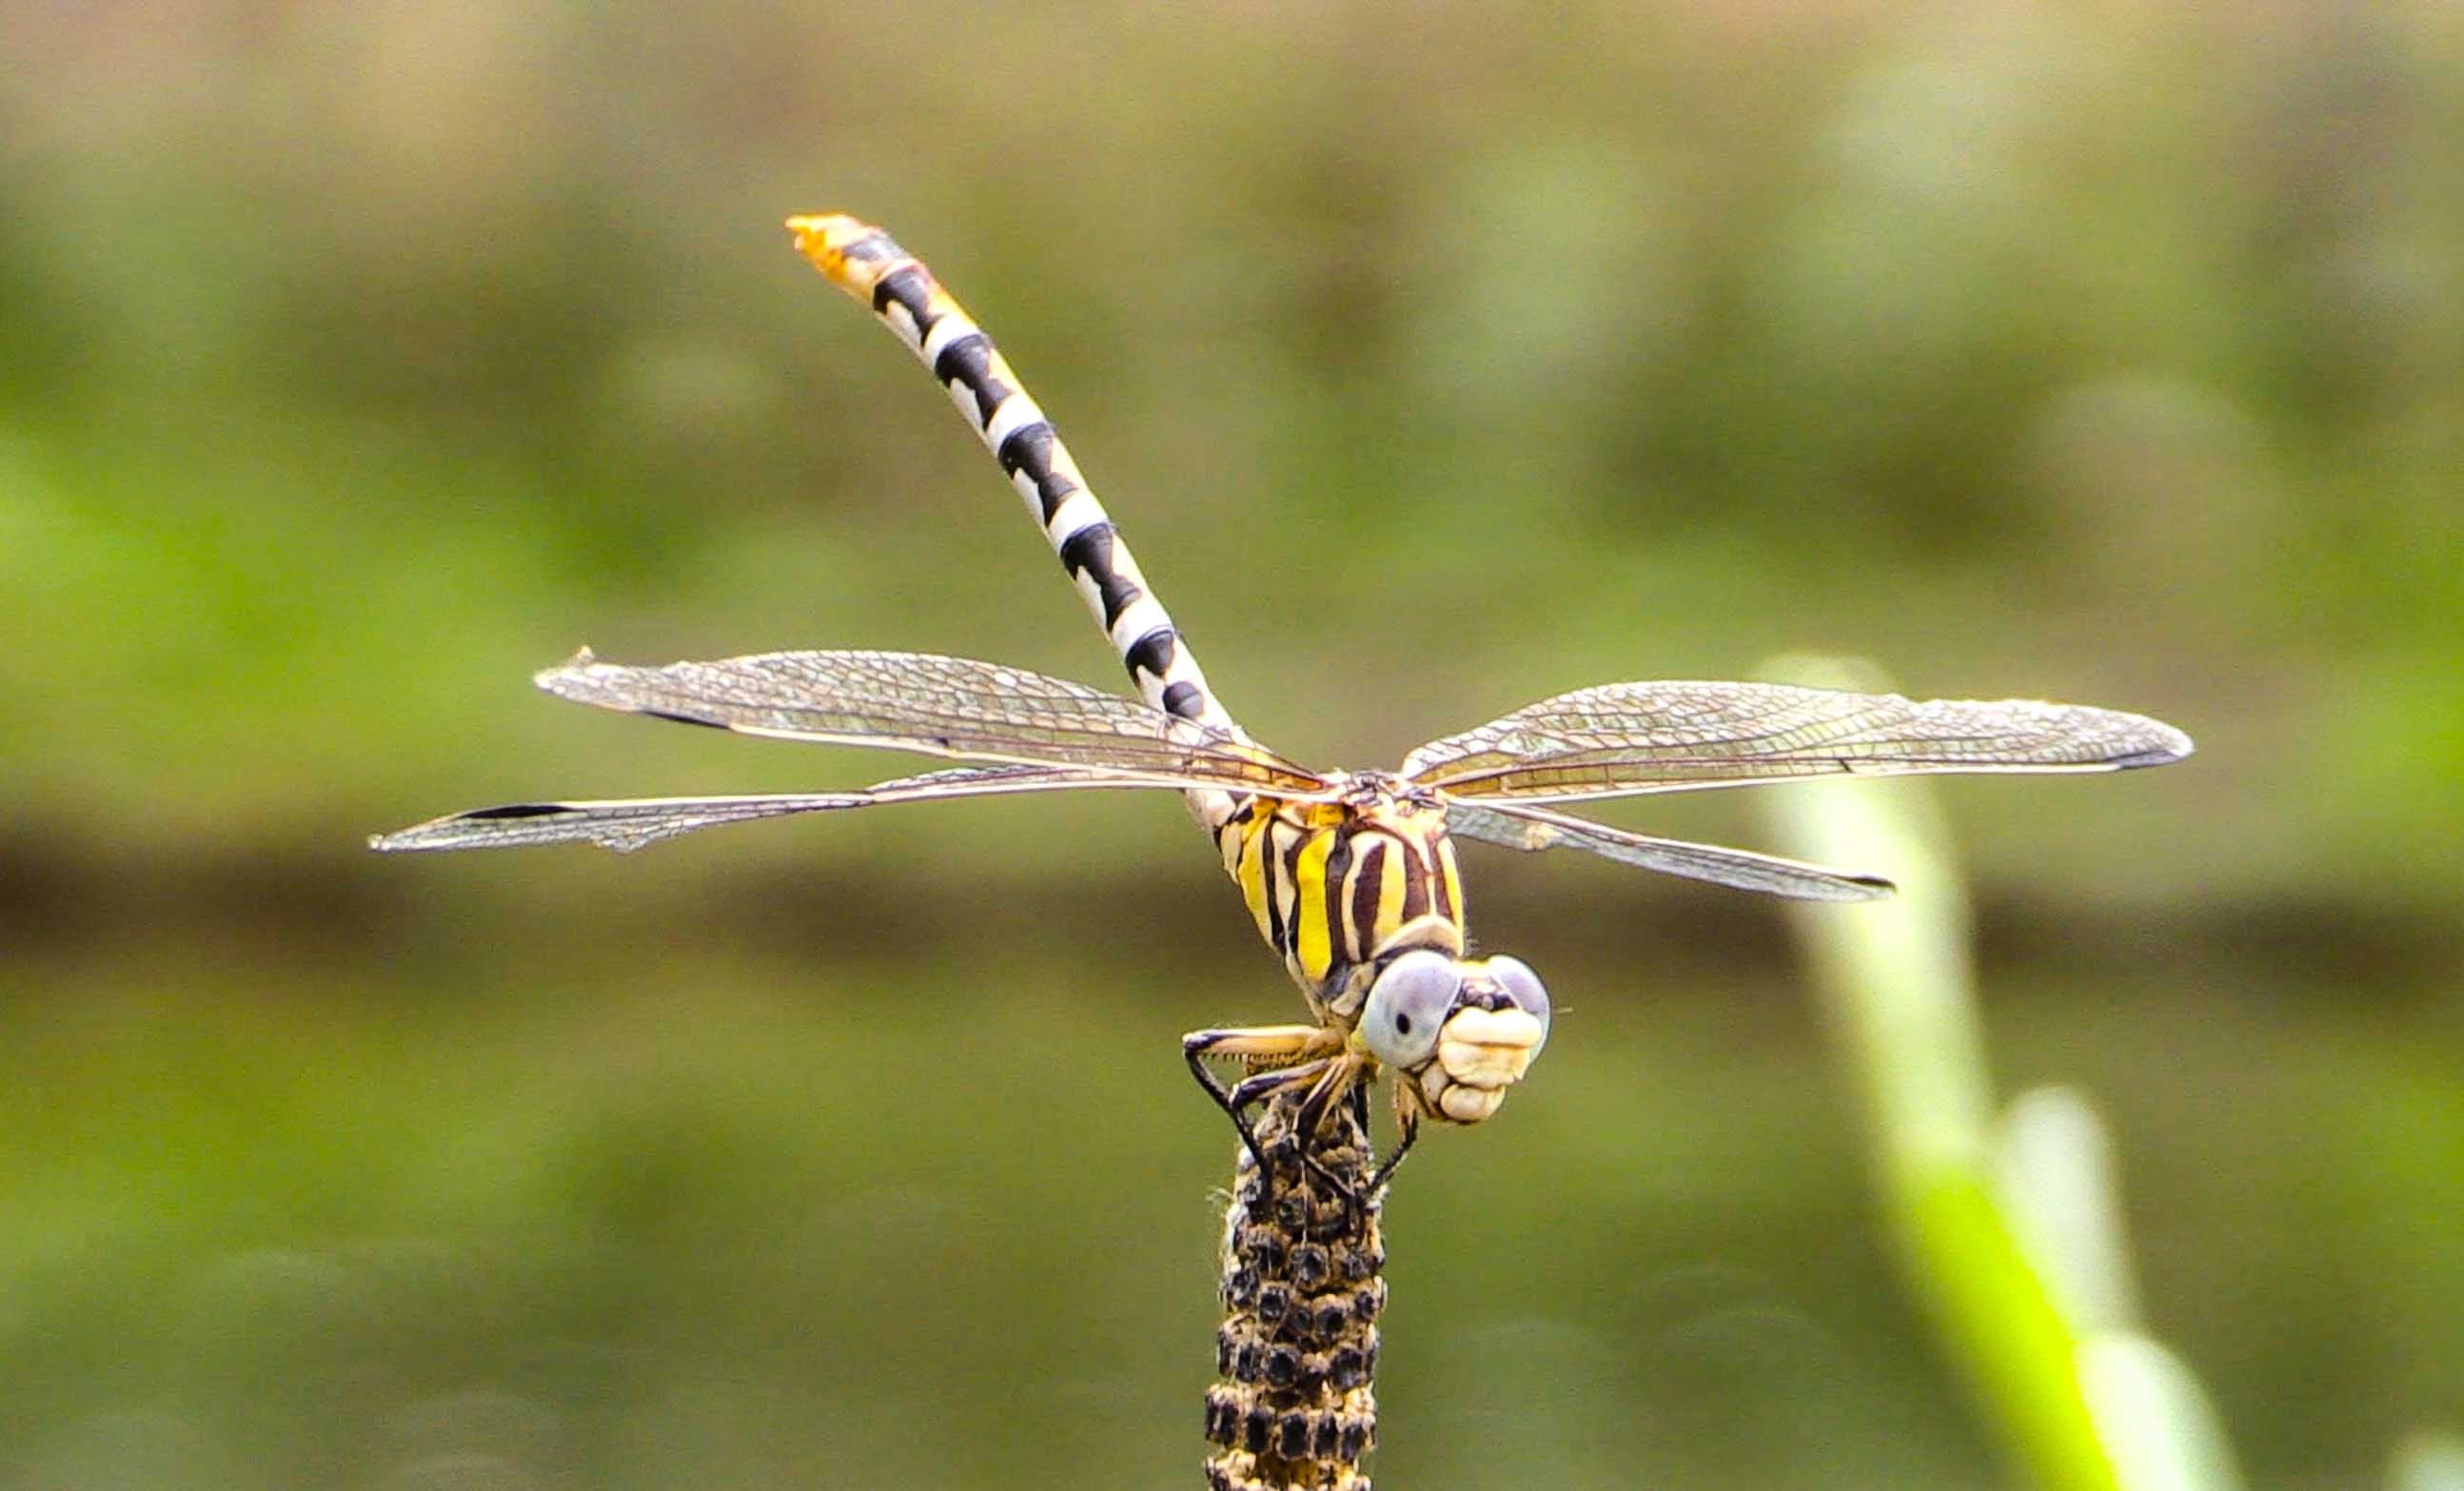 First Tuesday Tips: Tip 8, Adult Dragonflies Can Make for Exciting Fishing